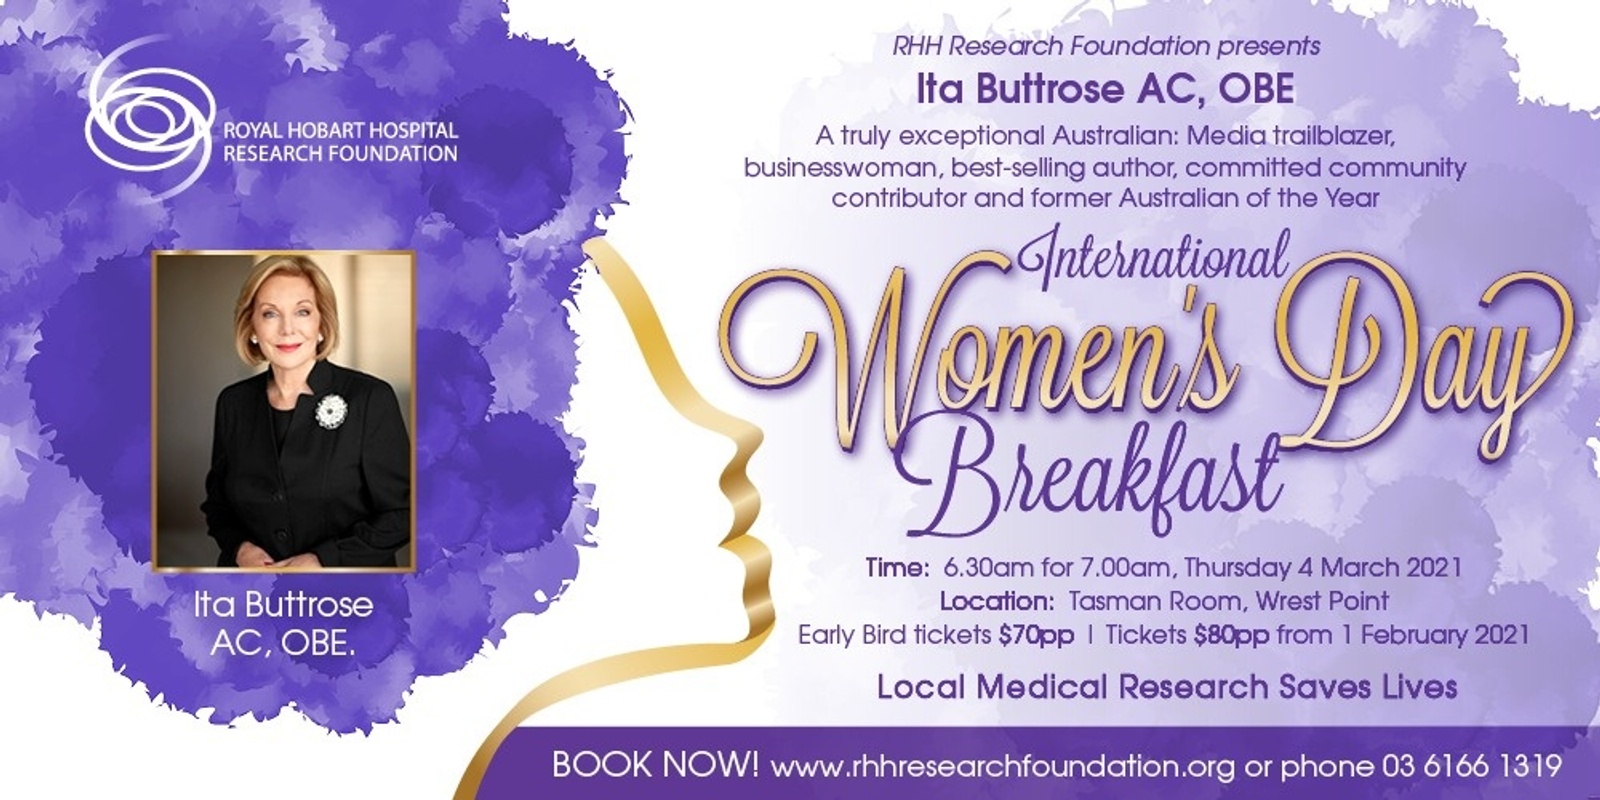 Banner image for 2021 RHH Research Foundation International Women's Day Breakfast